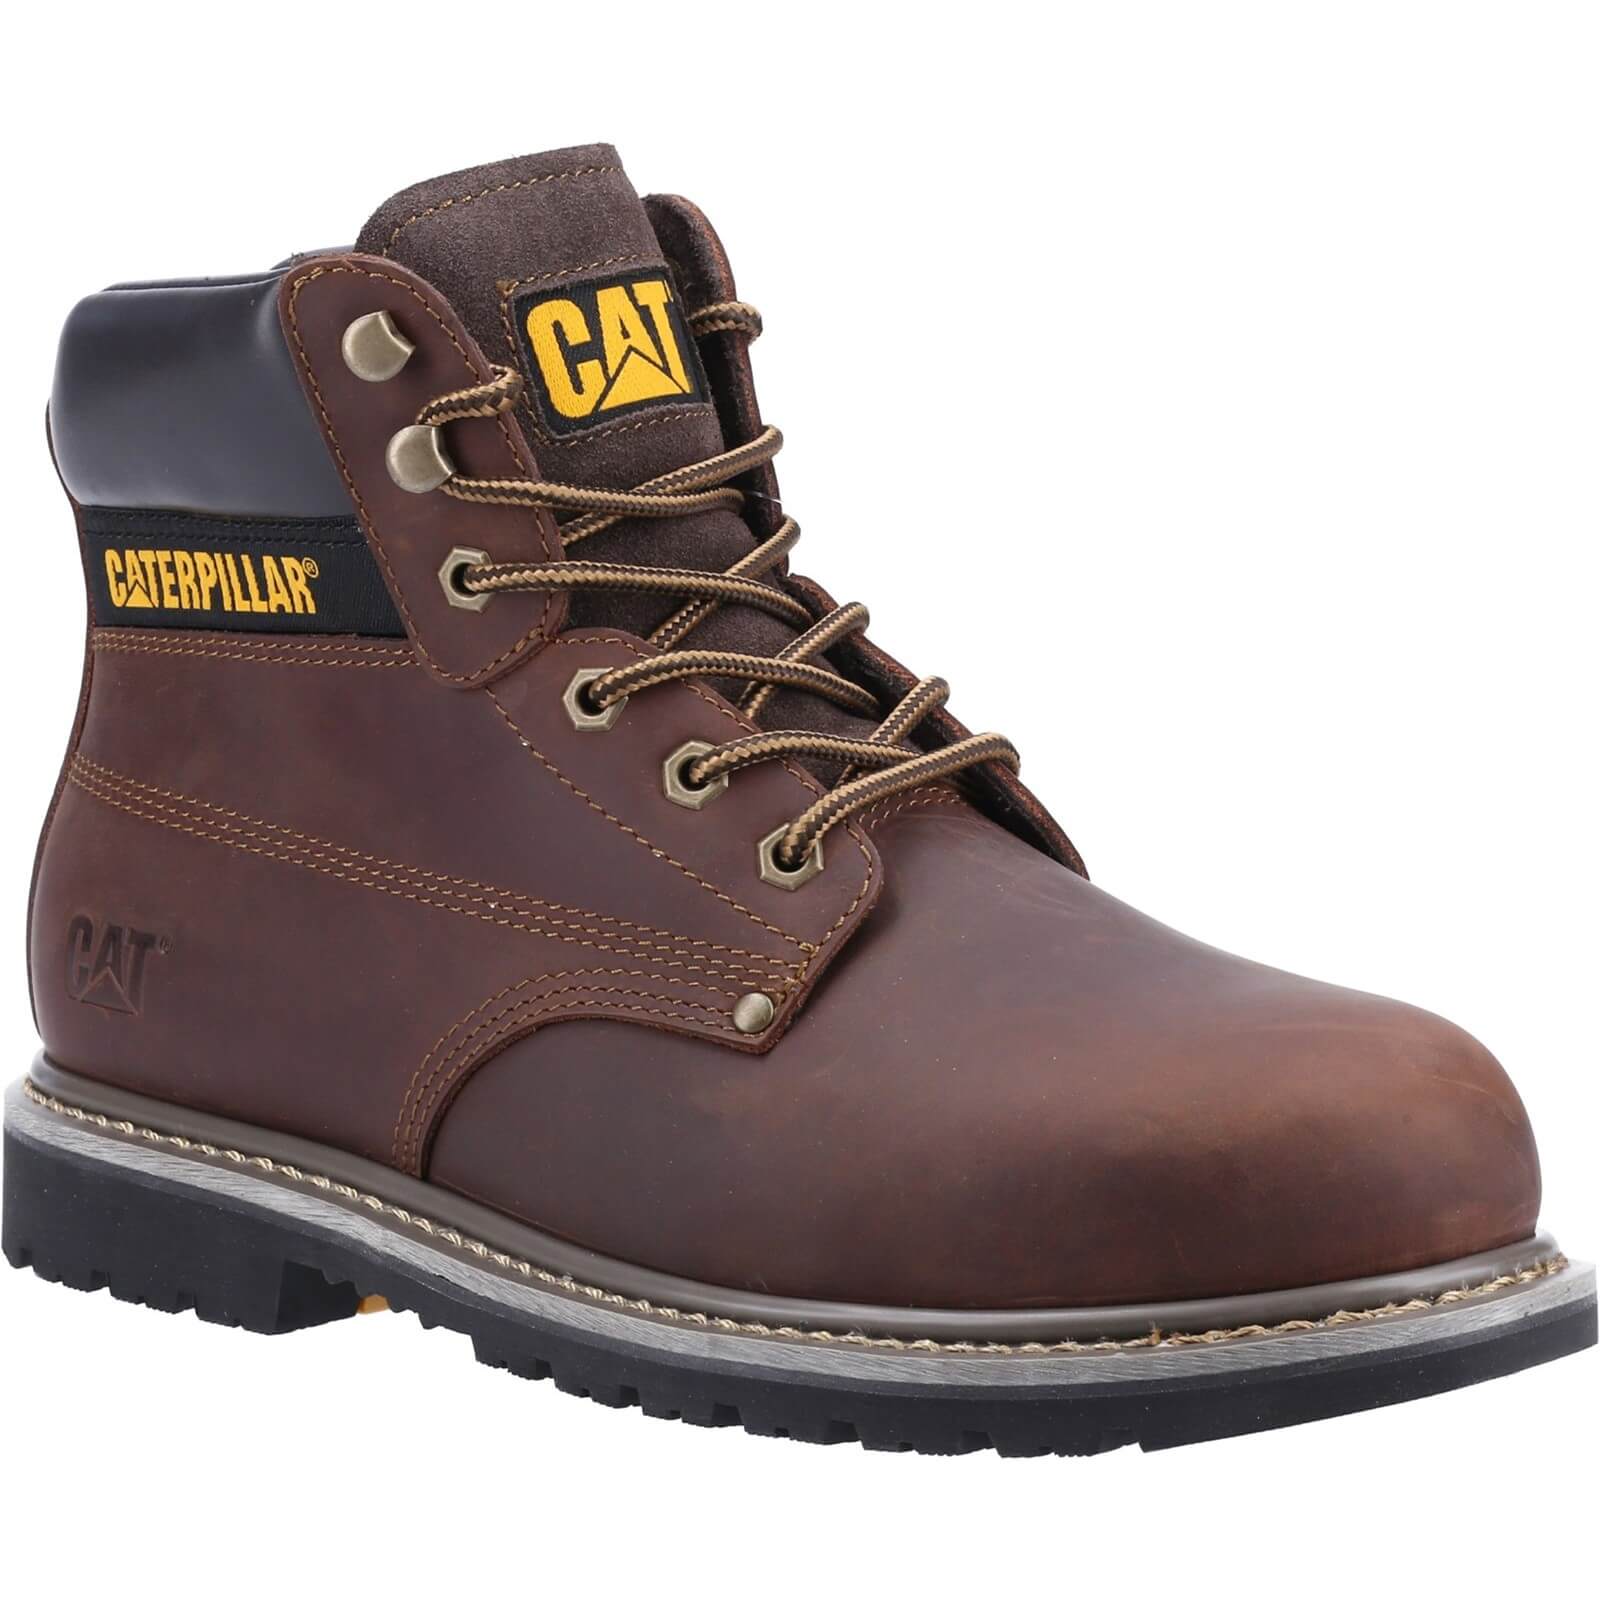 Caterpillar Powerplant S3 Gyw Safety Boots - Sale